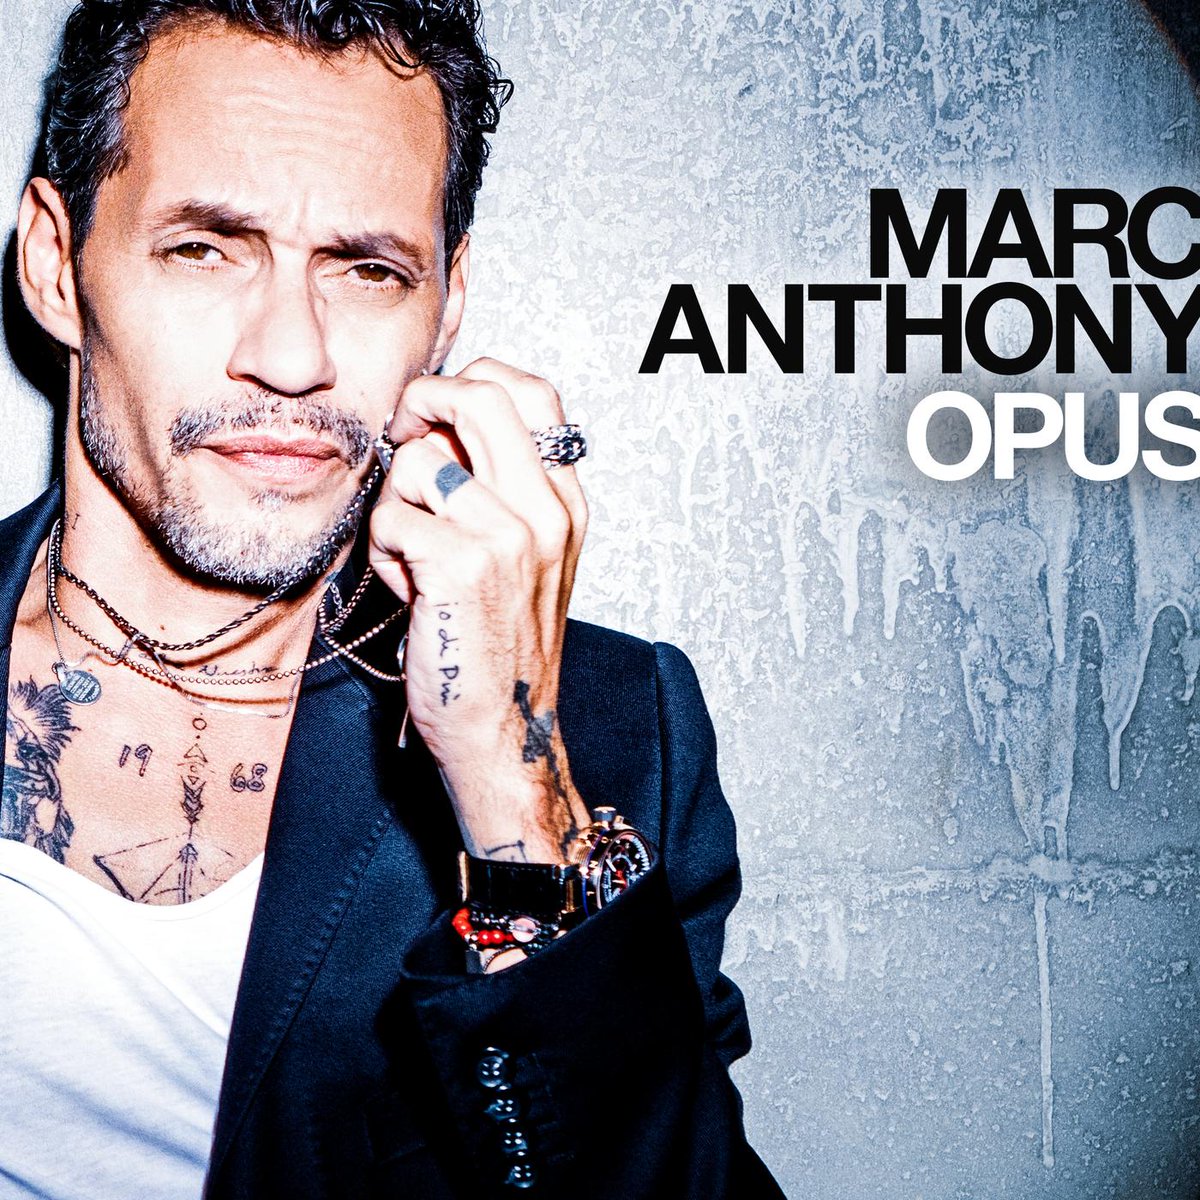 RT @TIDAL: Dropped: @MarcAnthony. #Opus. https://t.co/hKZsiwKMa1 https://t.co/2IRmehCEda